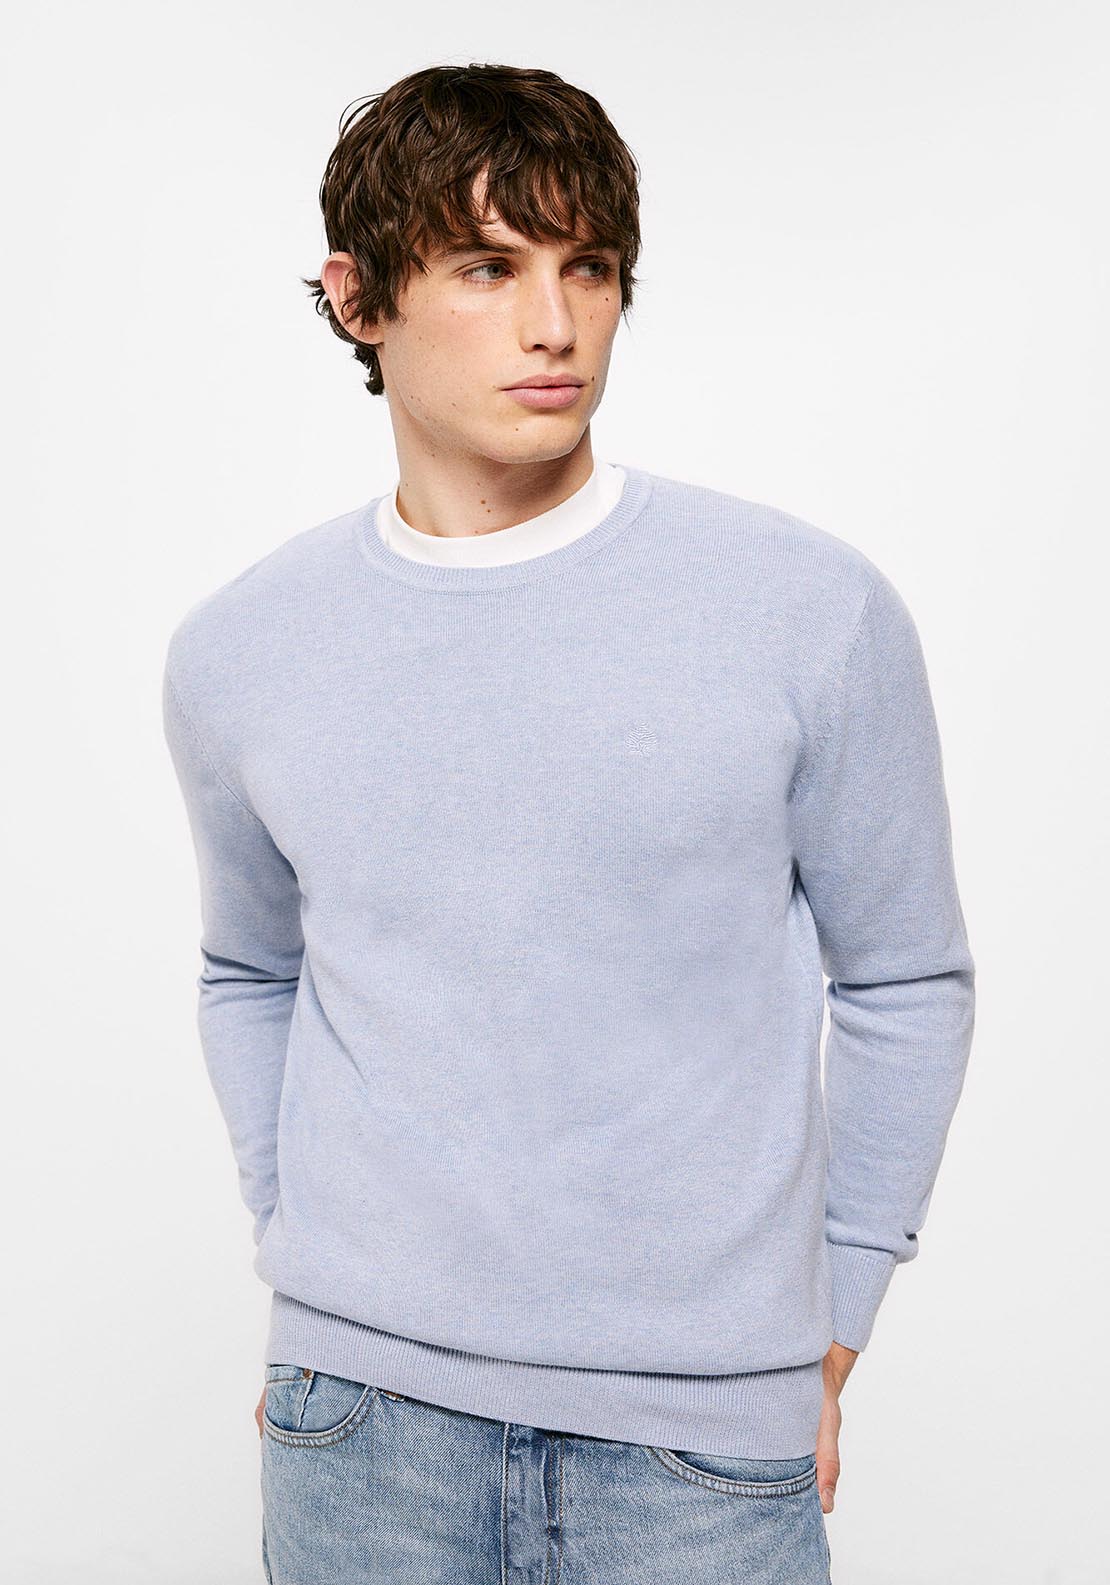 Springfield Essential jumper with elbow patches - Blue 1 Shaws Department Stores